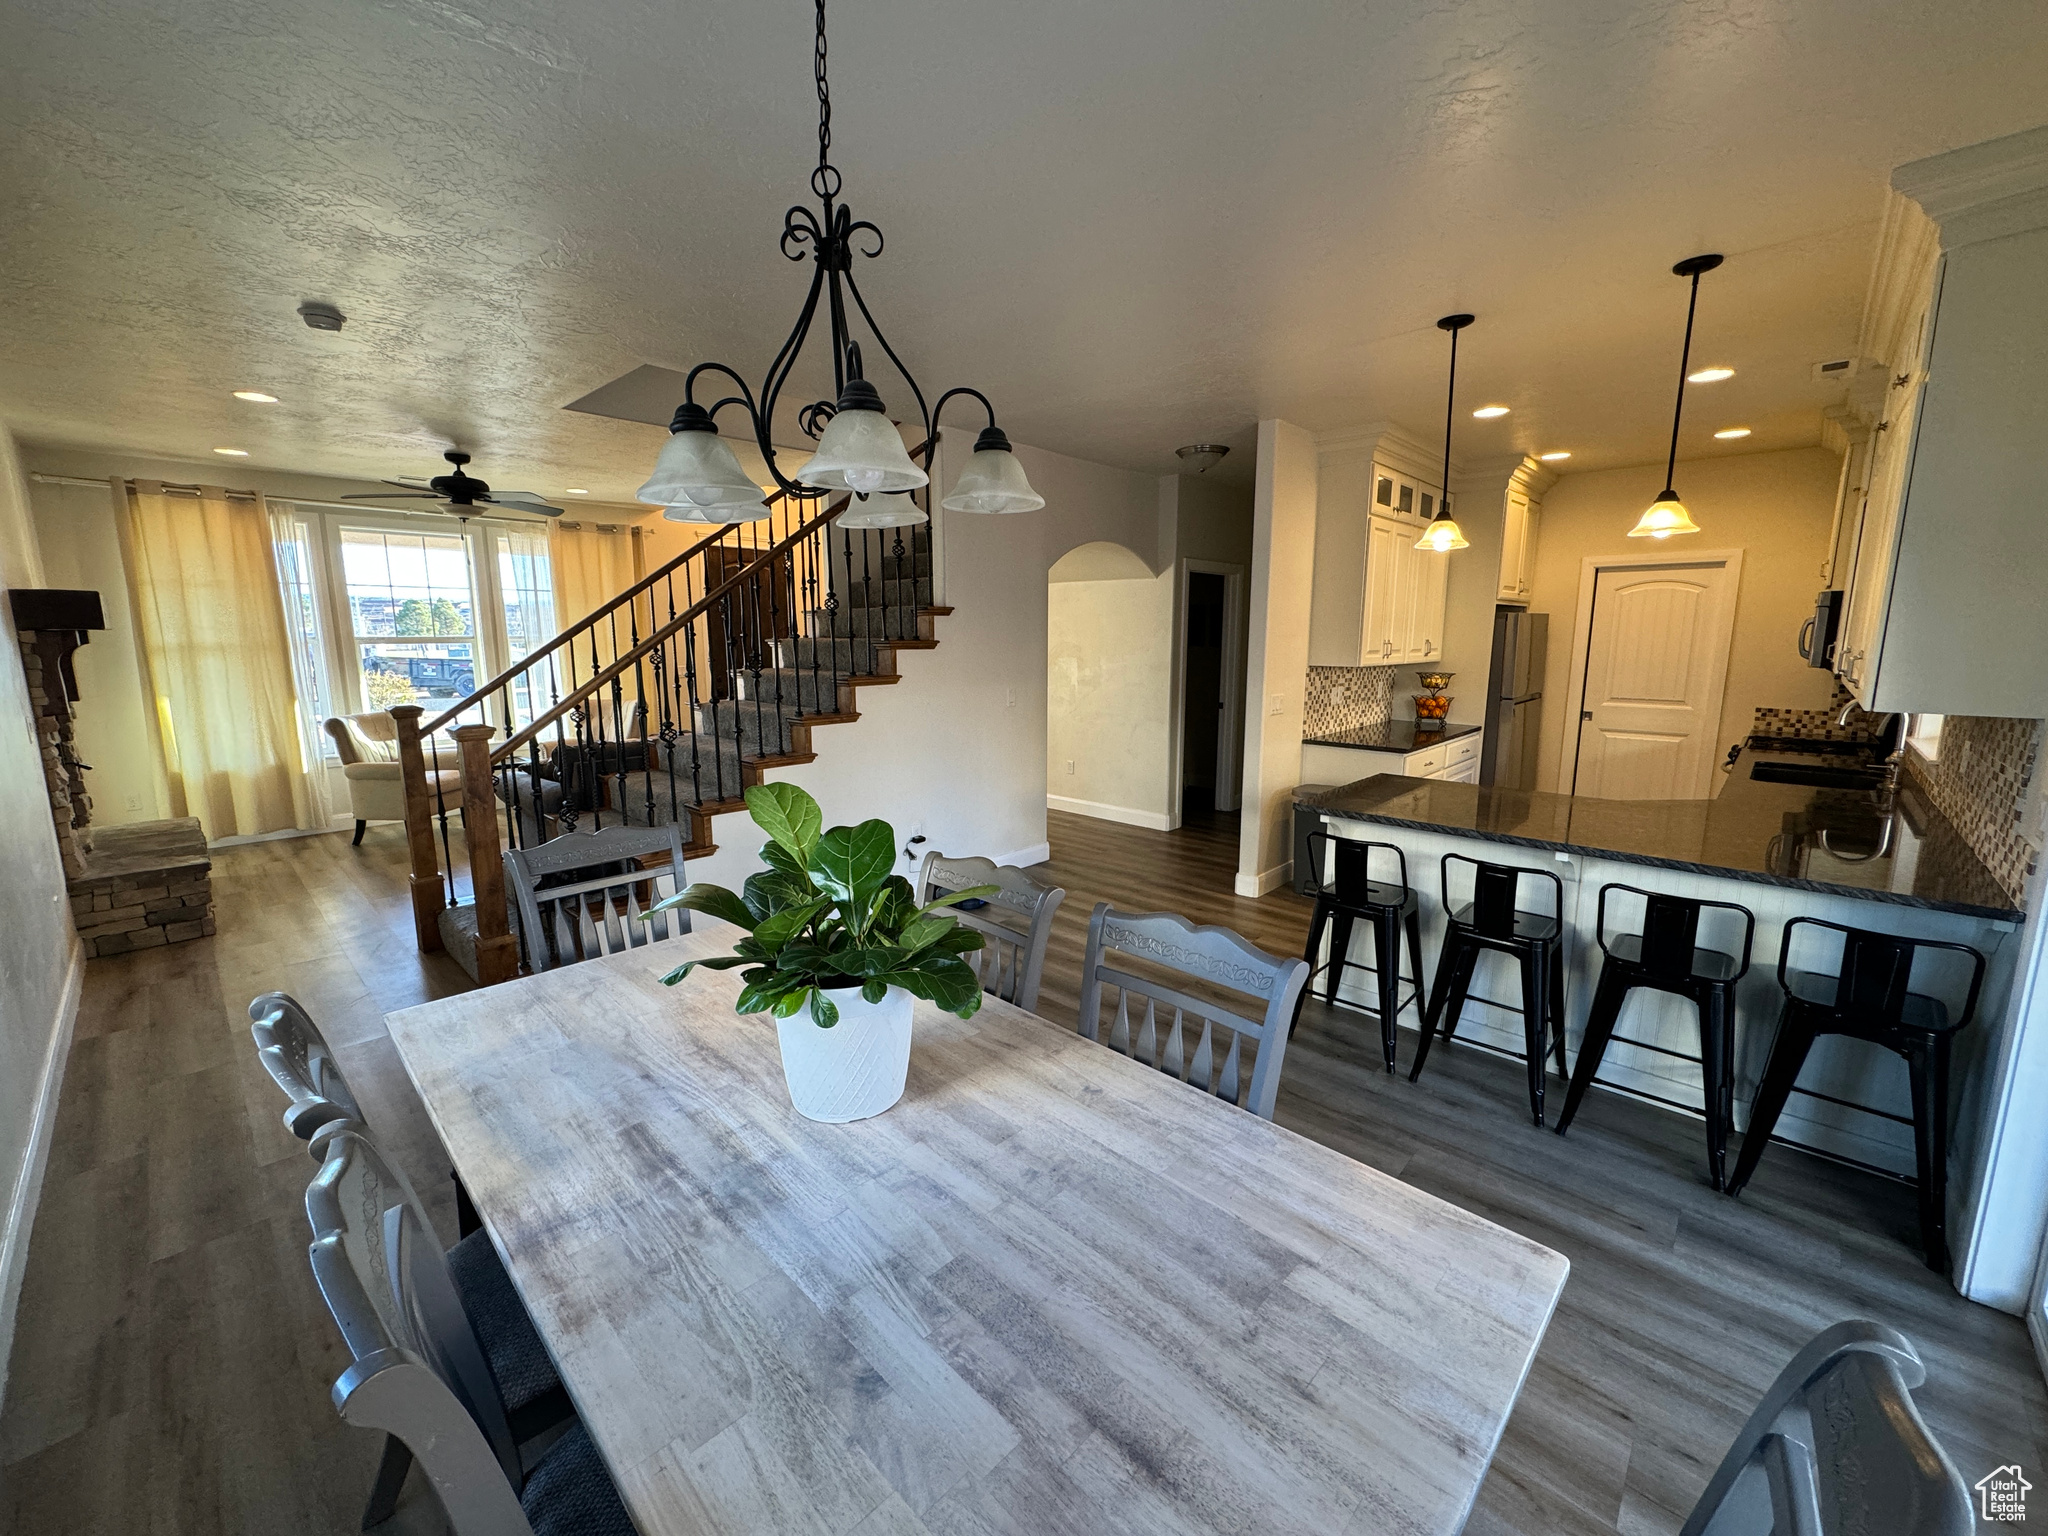 Dining space with dark hardwood / wood-style floors, ceiling fan, a textured ceiling, and sink